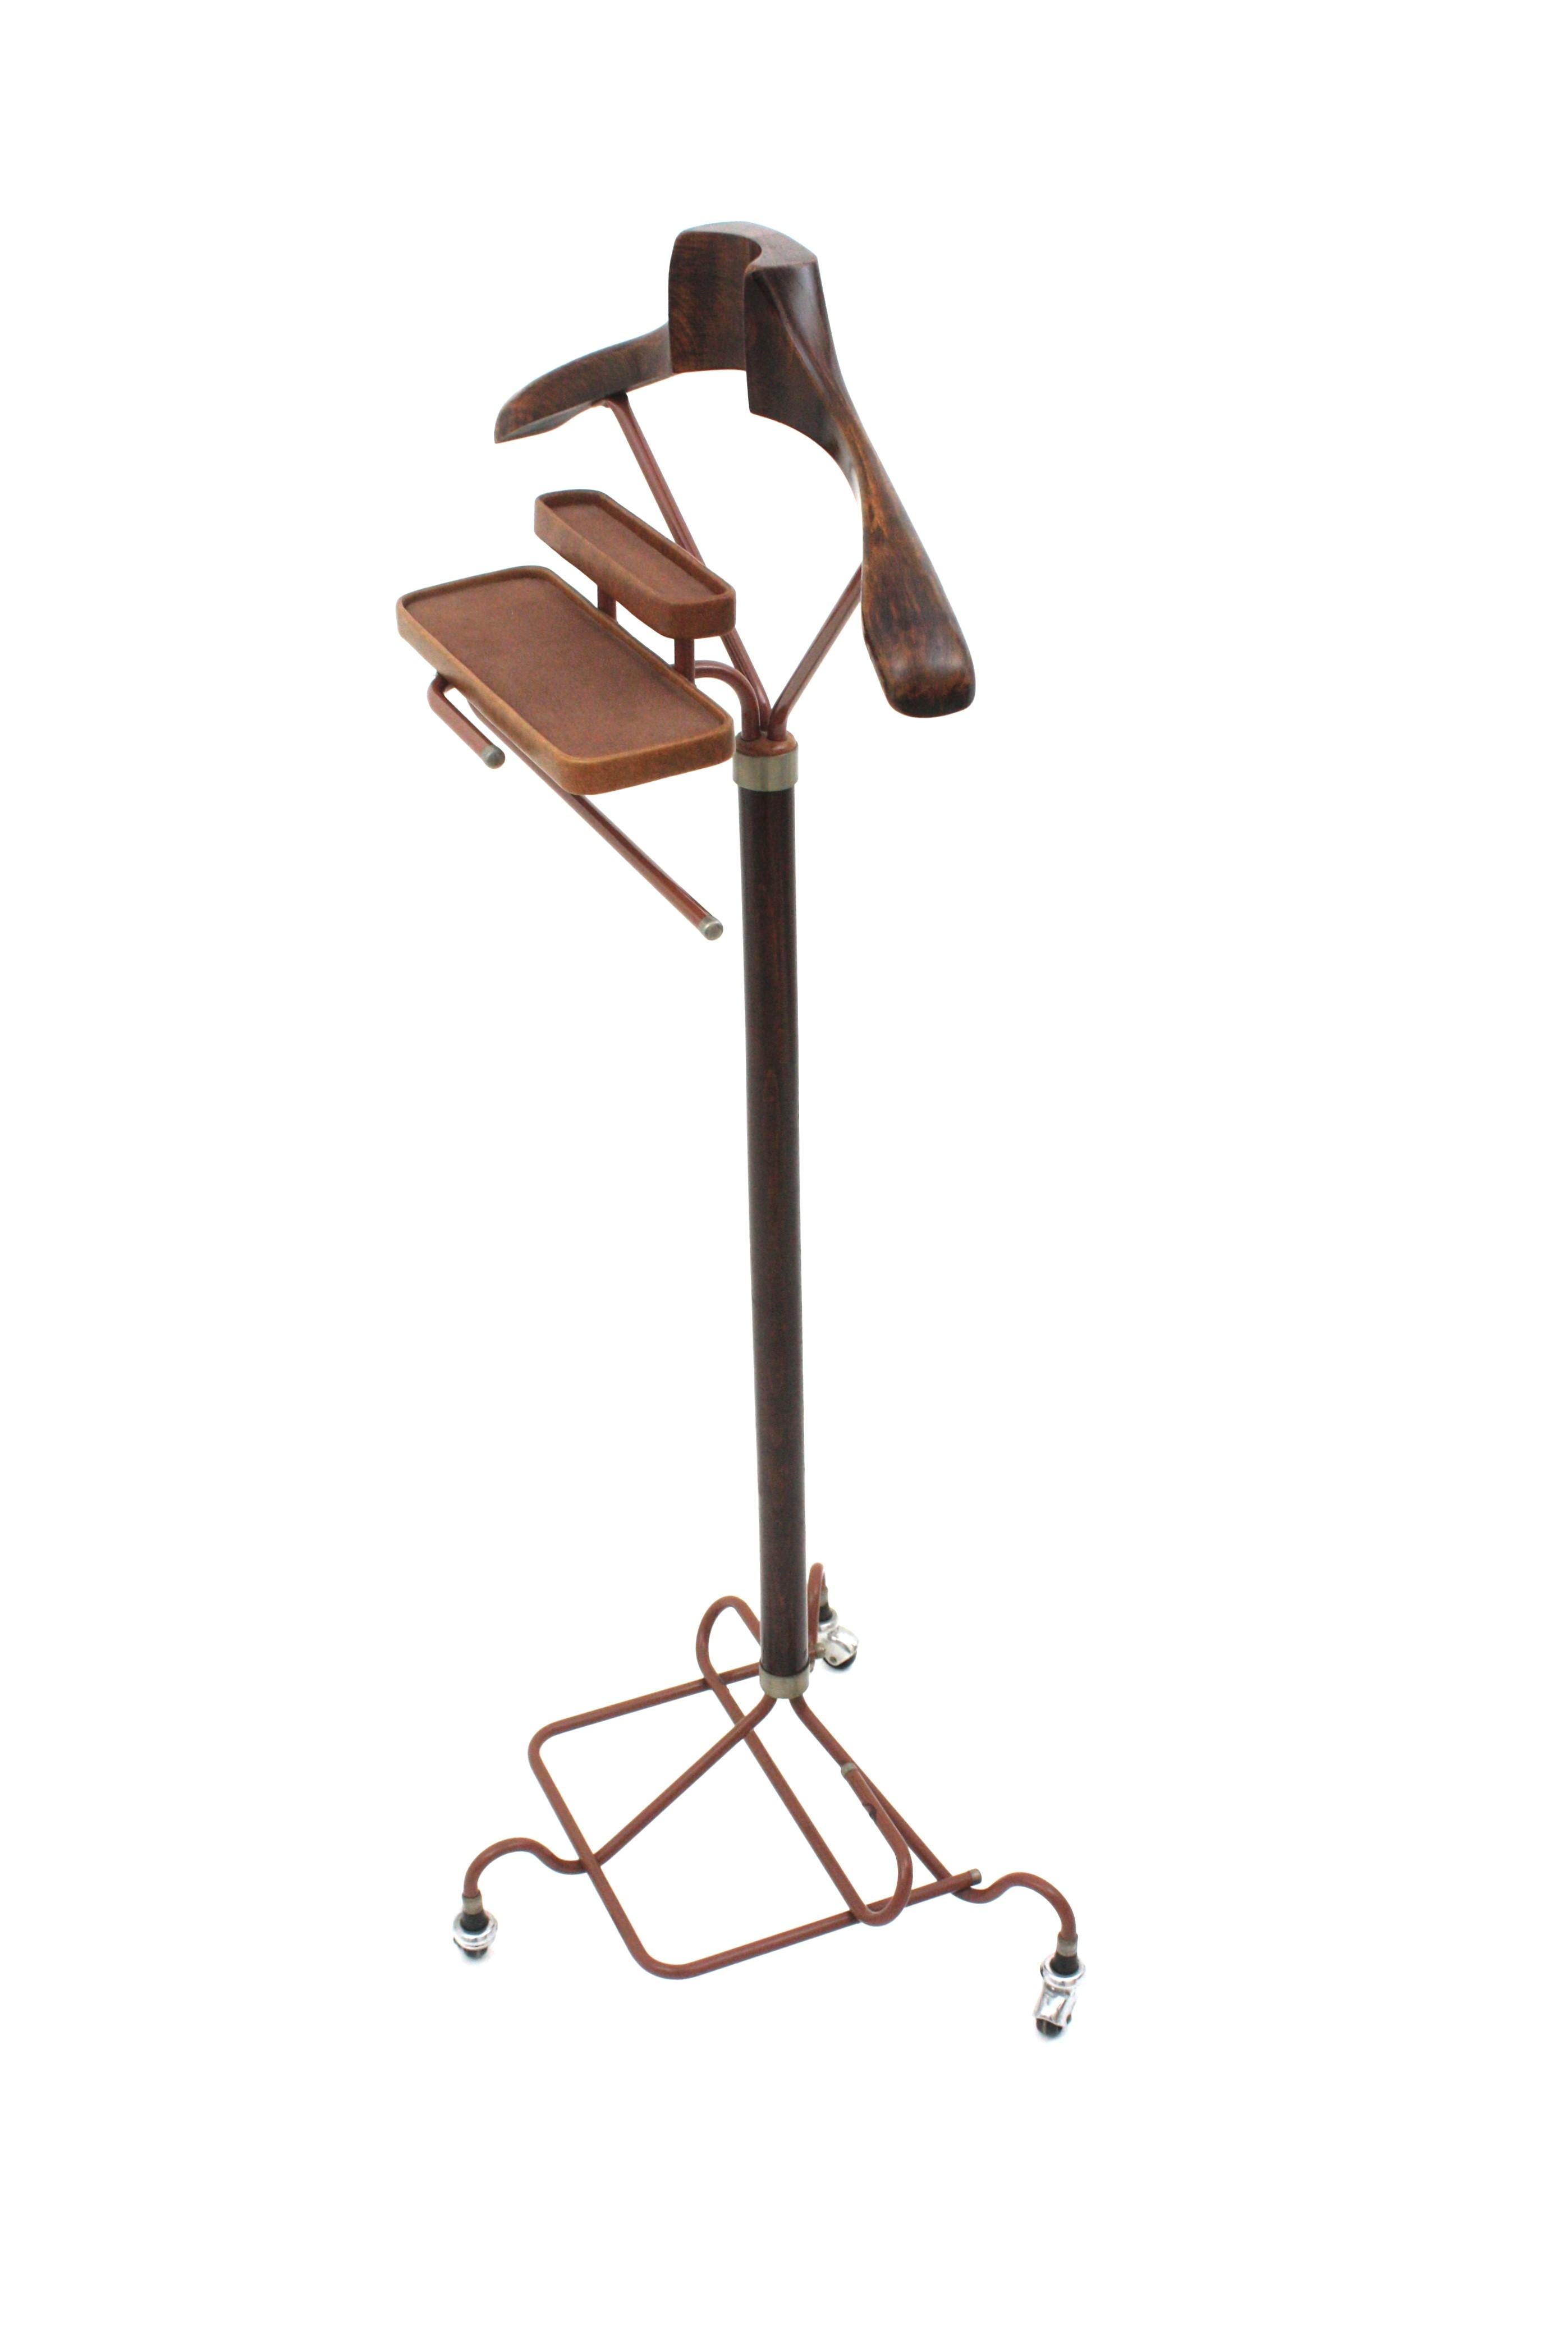 Italian Beech Wood and Acrylic Valet Stand Dressboy, 1960s For Sale 2